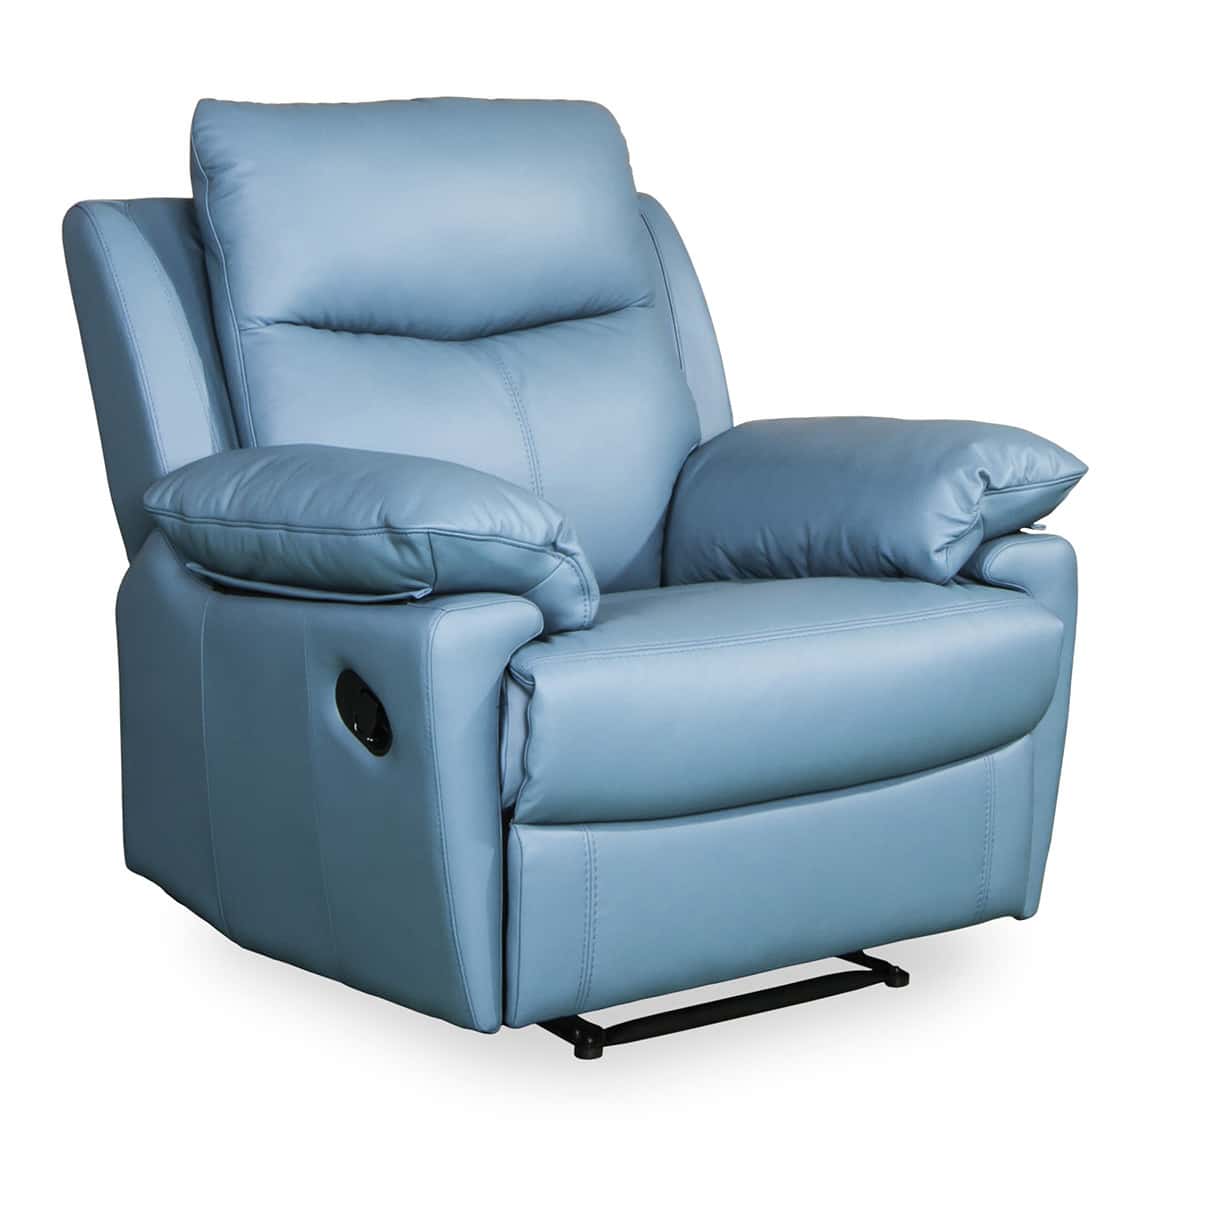 Leather Recliner Max Brisbane, Navy Leather Recliner Chairs